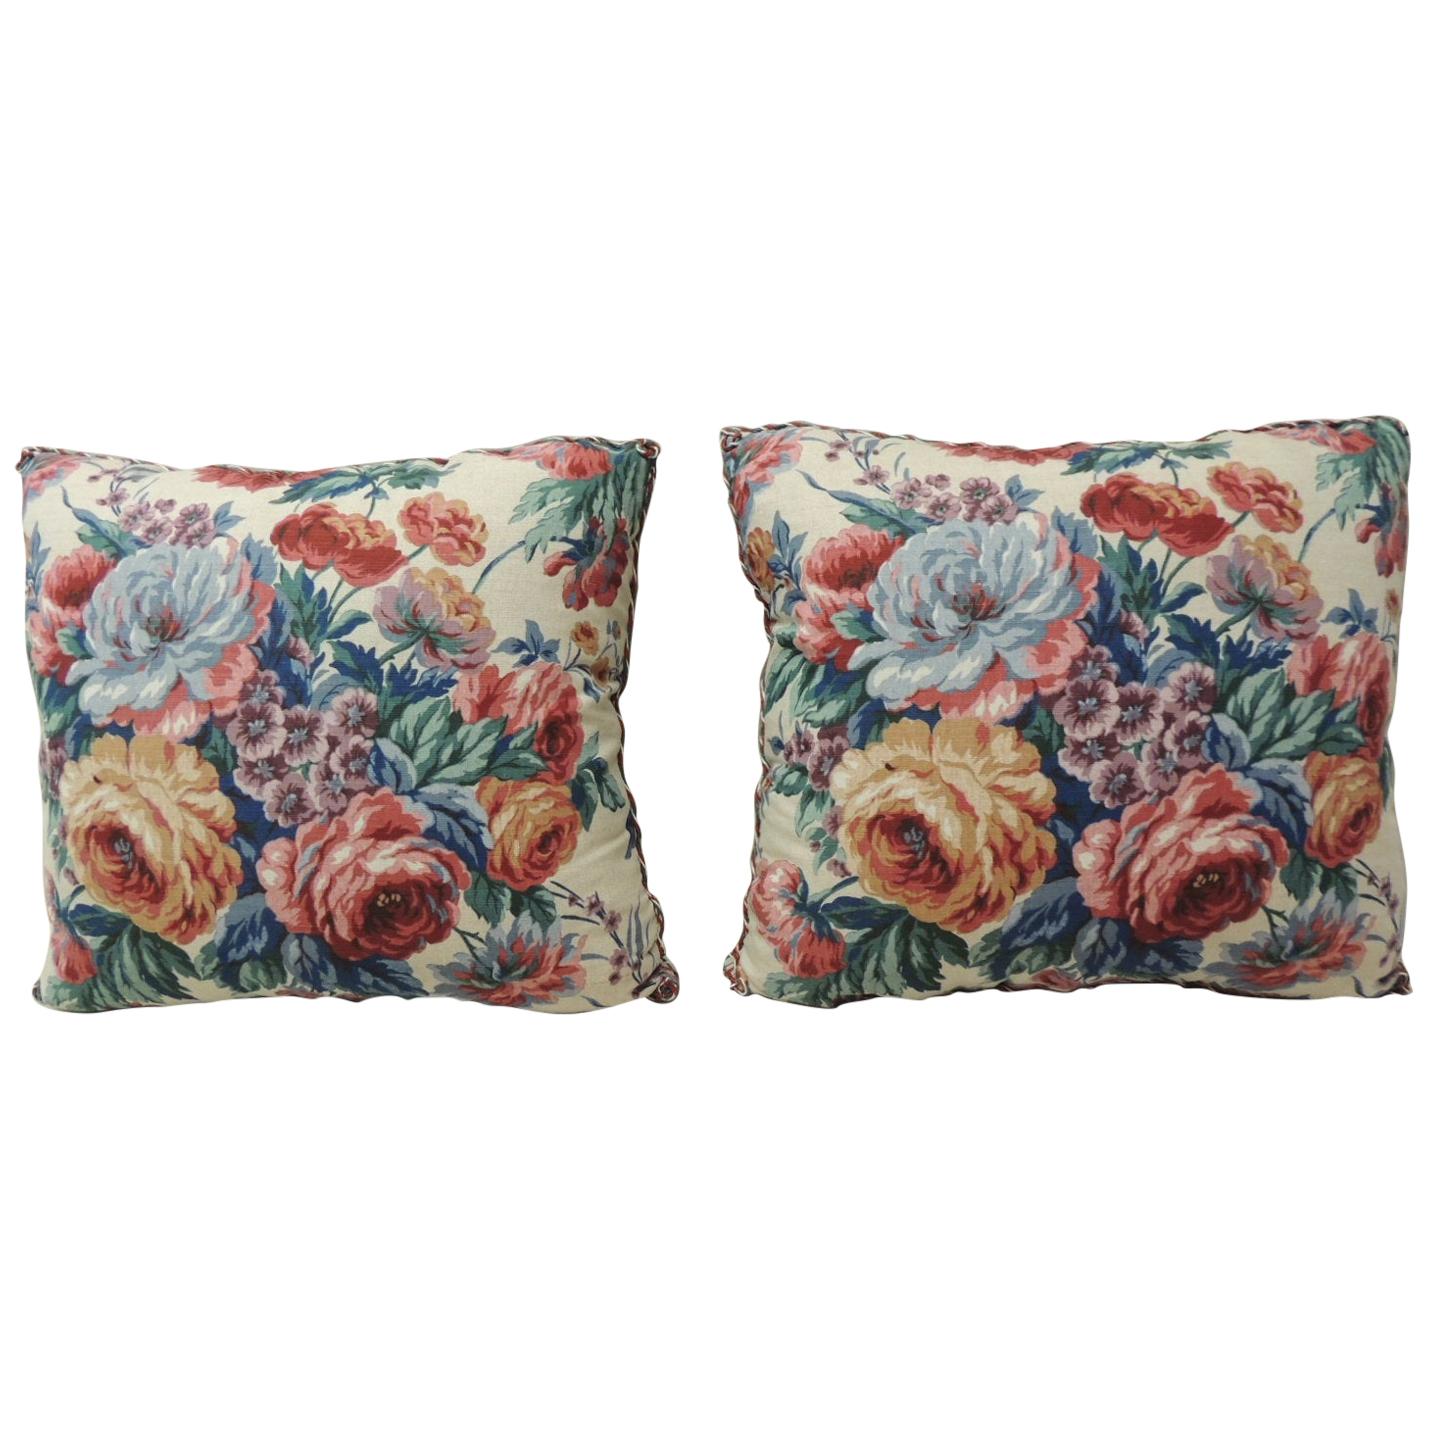 Pair of Floral Orange and Red Cabbage Roses Linen Decorative Pillows